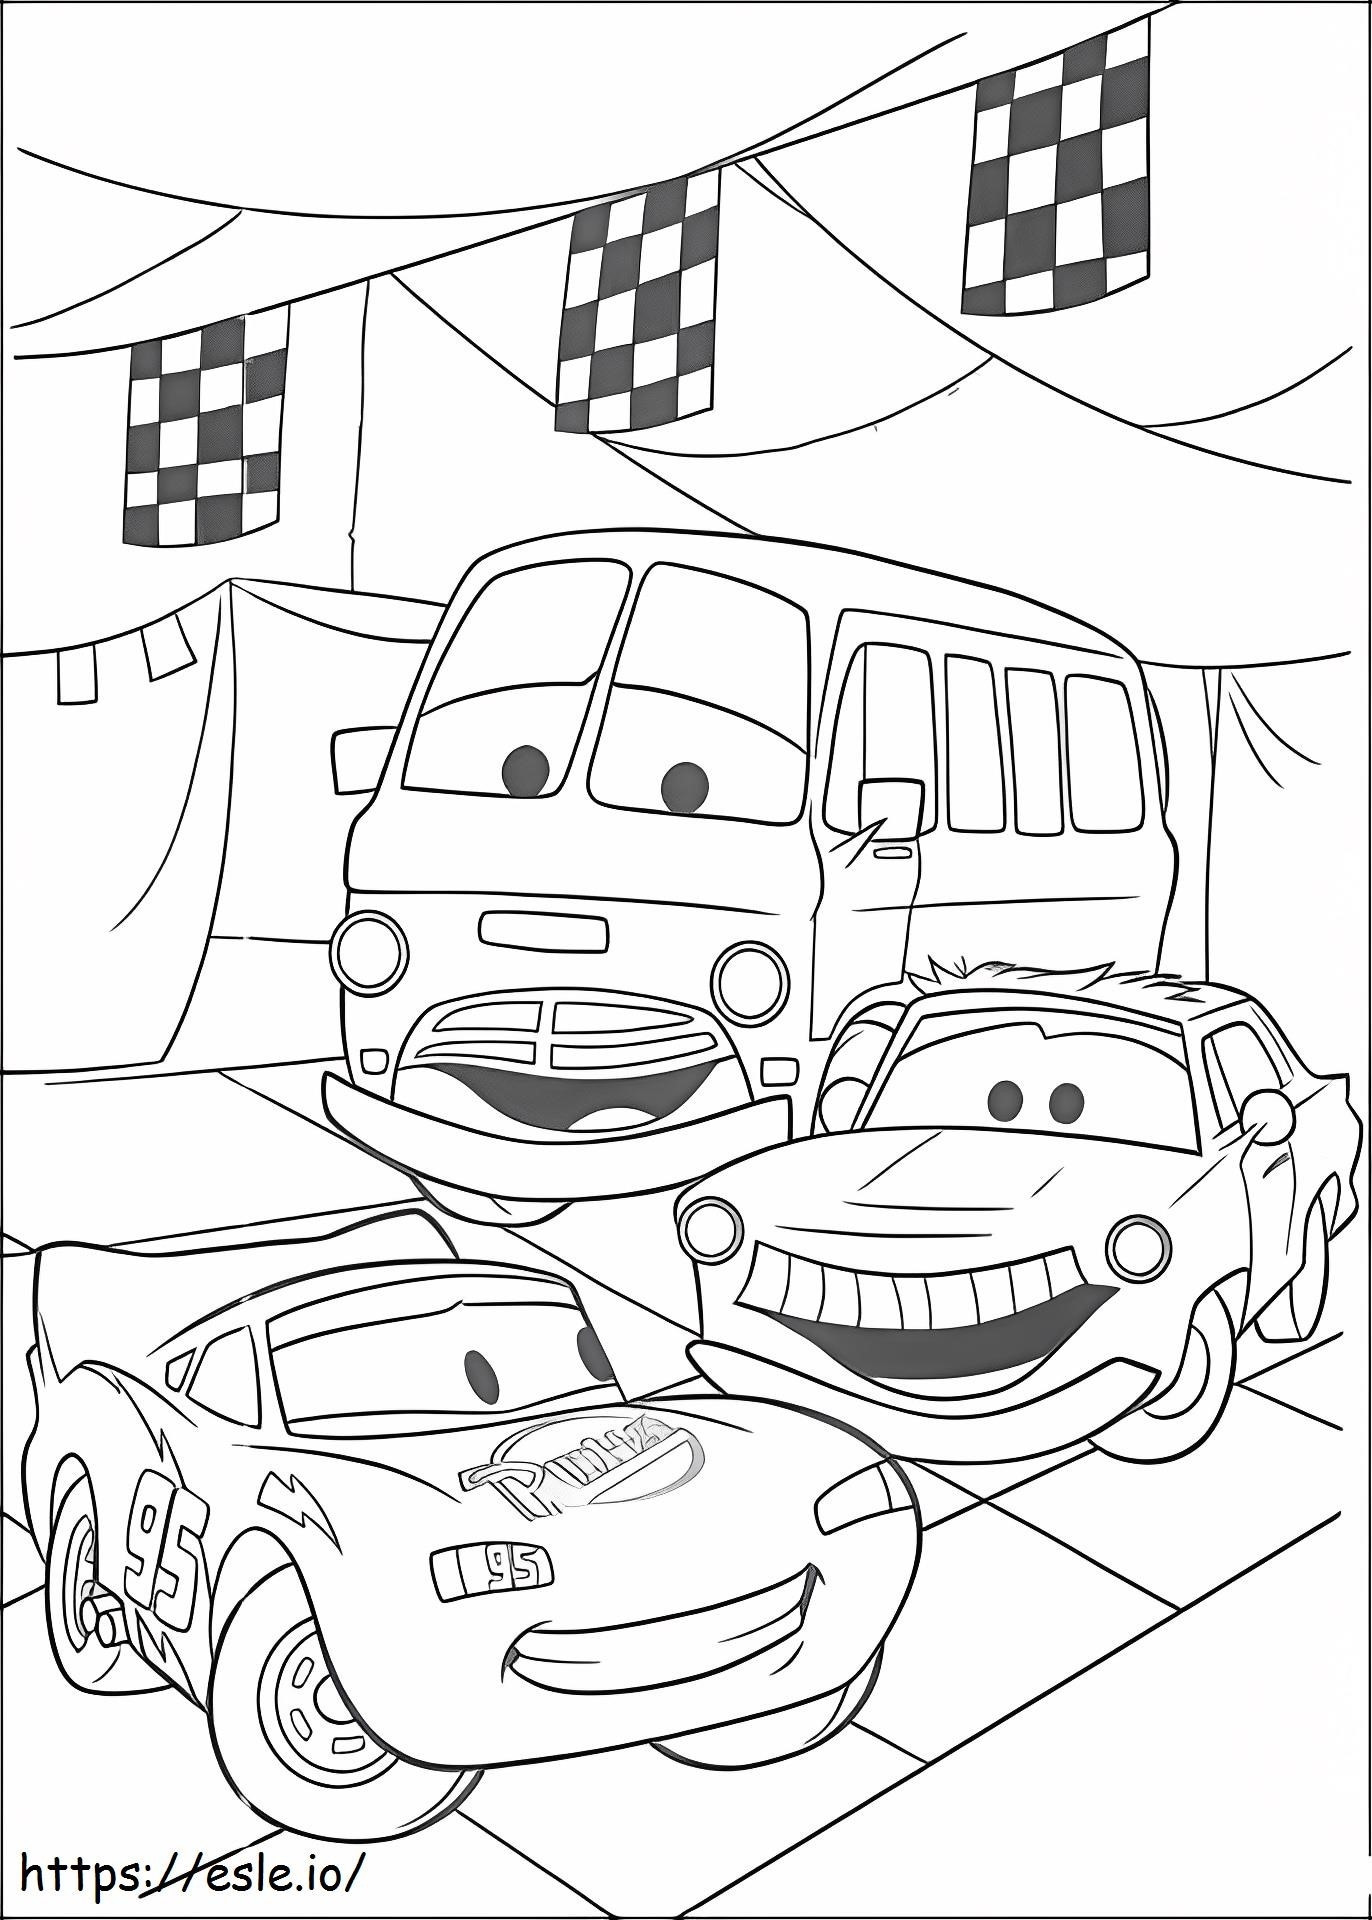 1539944844 Prepare To Racing coloring page